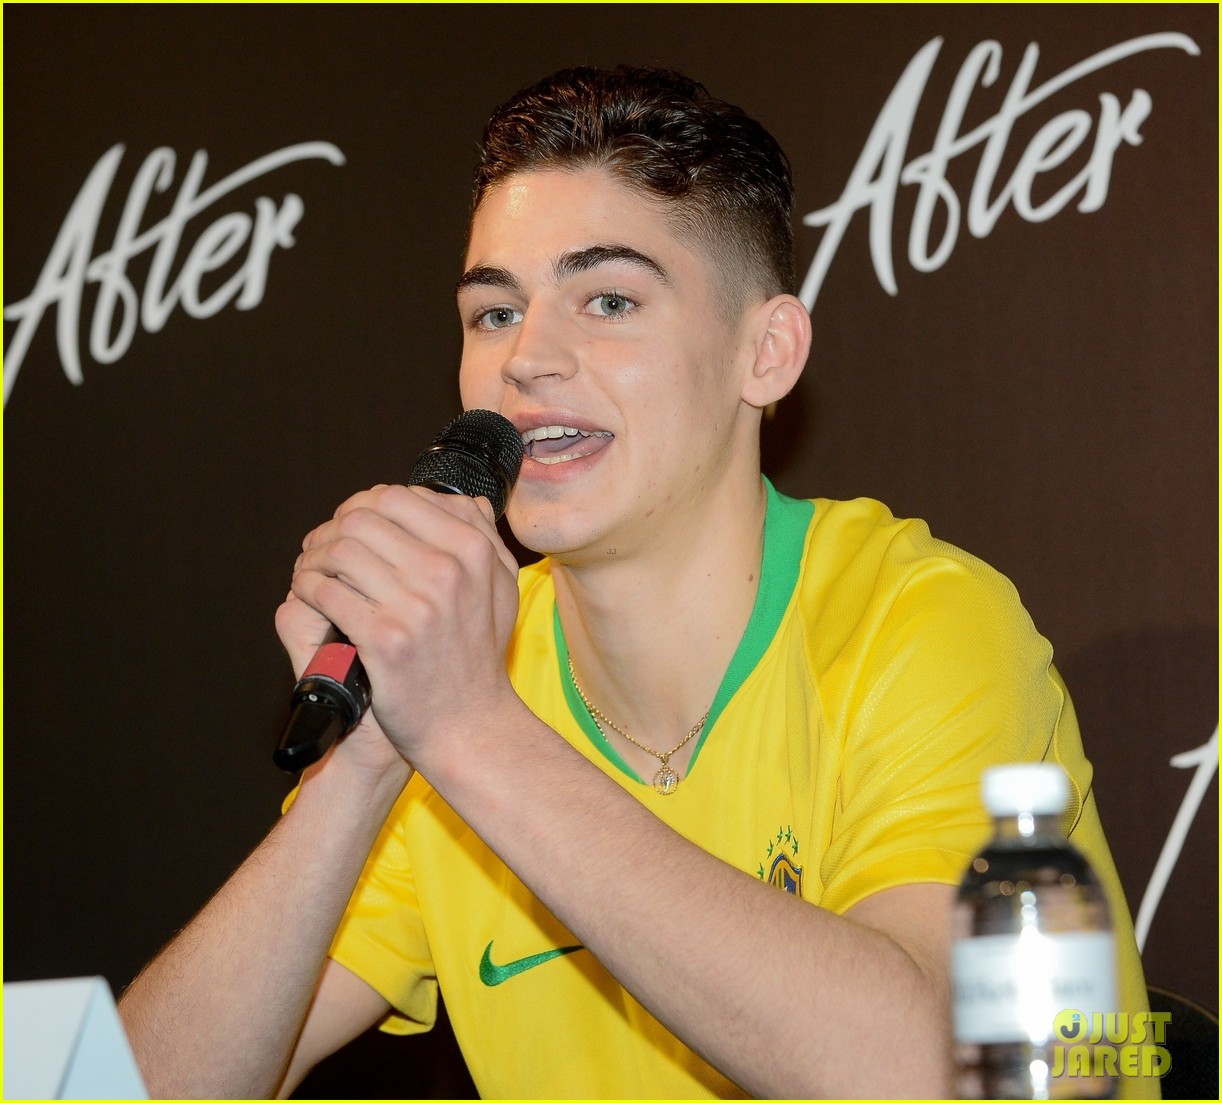 Hero Fiennes-Tiffin speaks to reporters during a press event for “After” in Brazil.